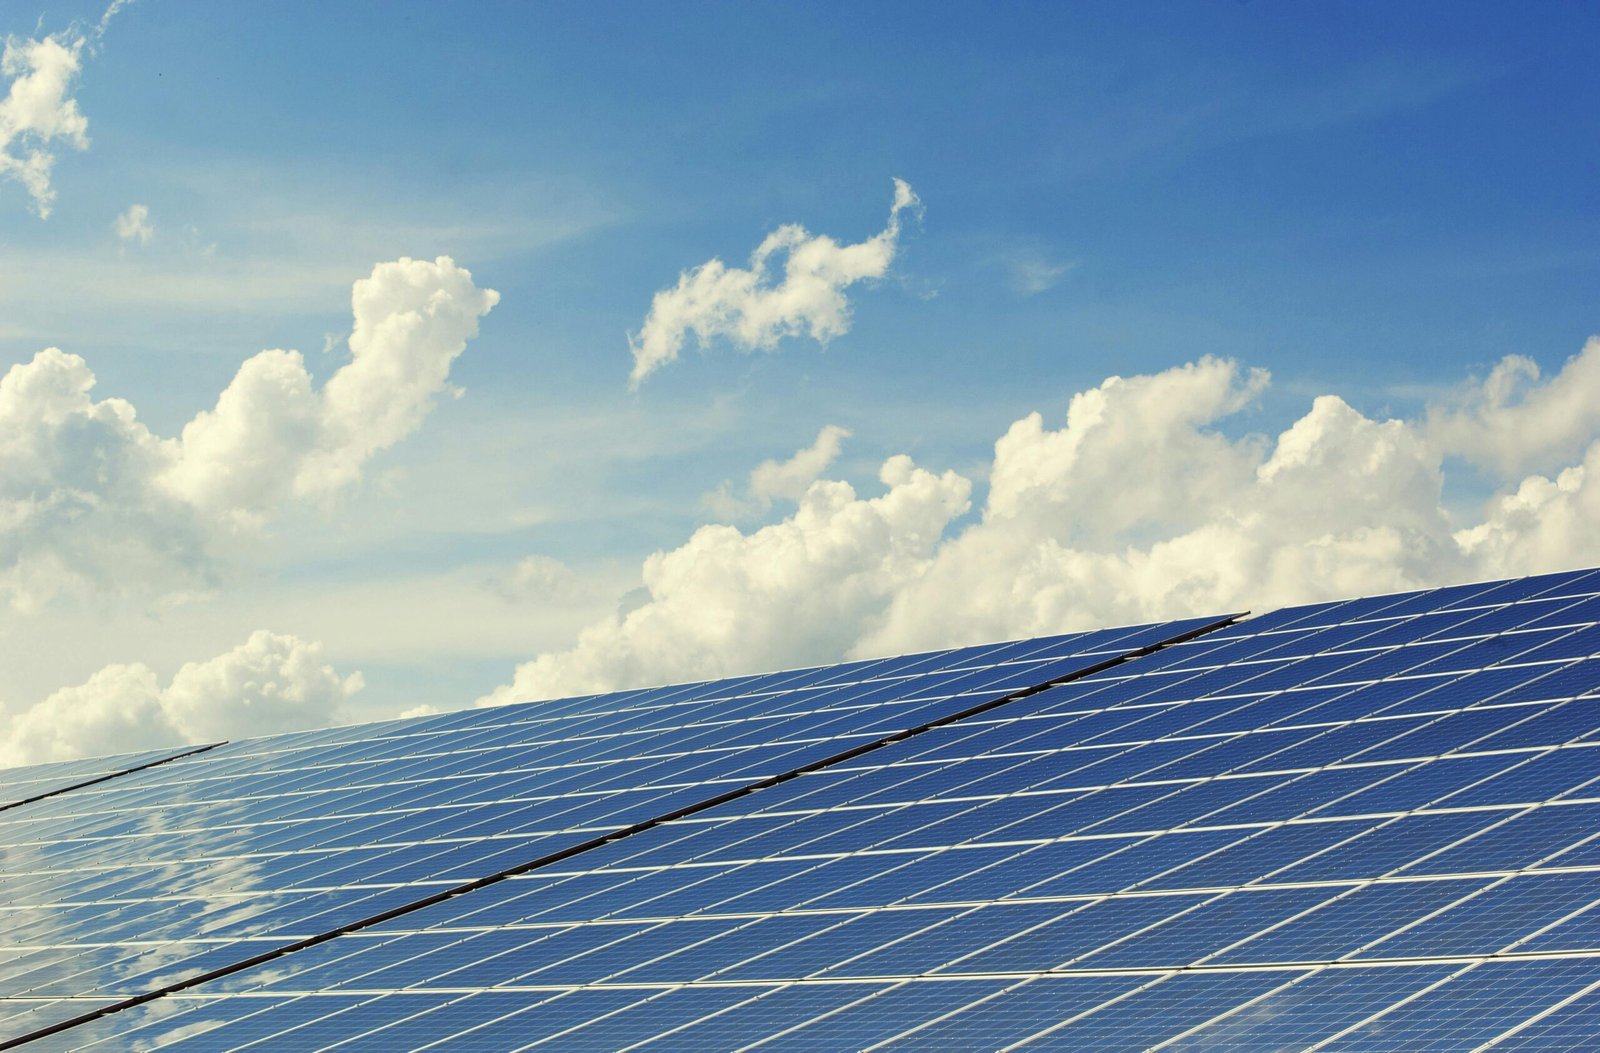 Going Green with Solar Panels: How They Can Benefit You and the Planet